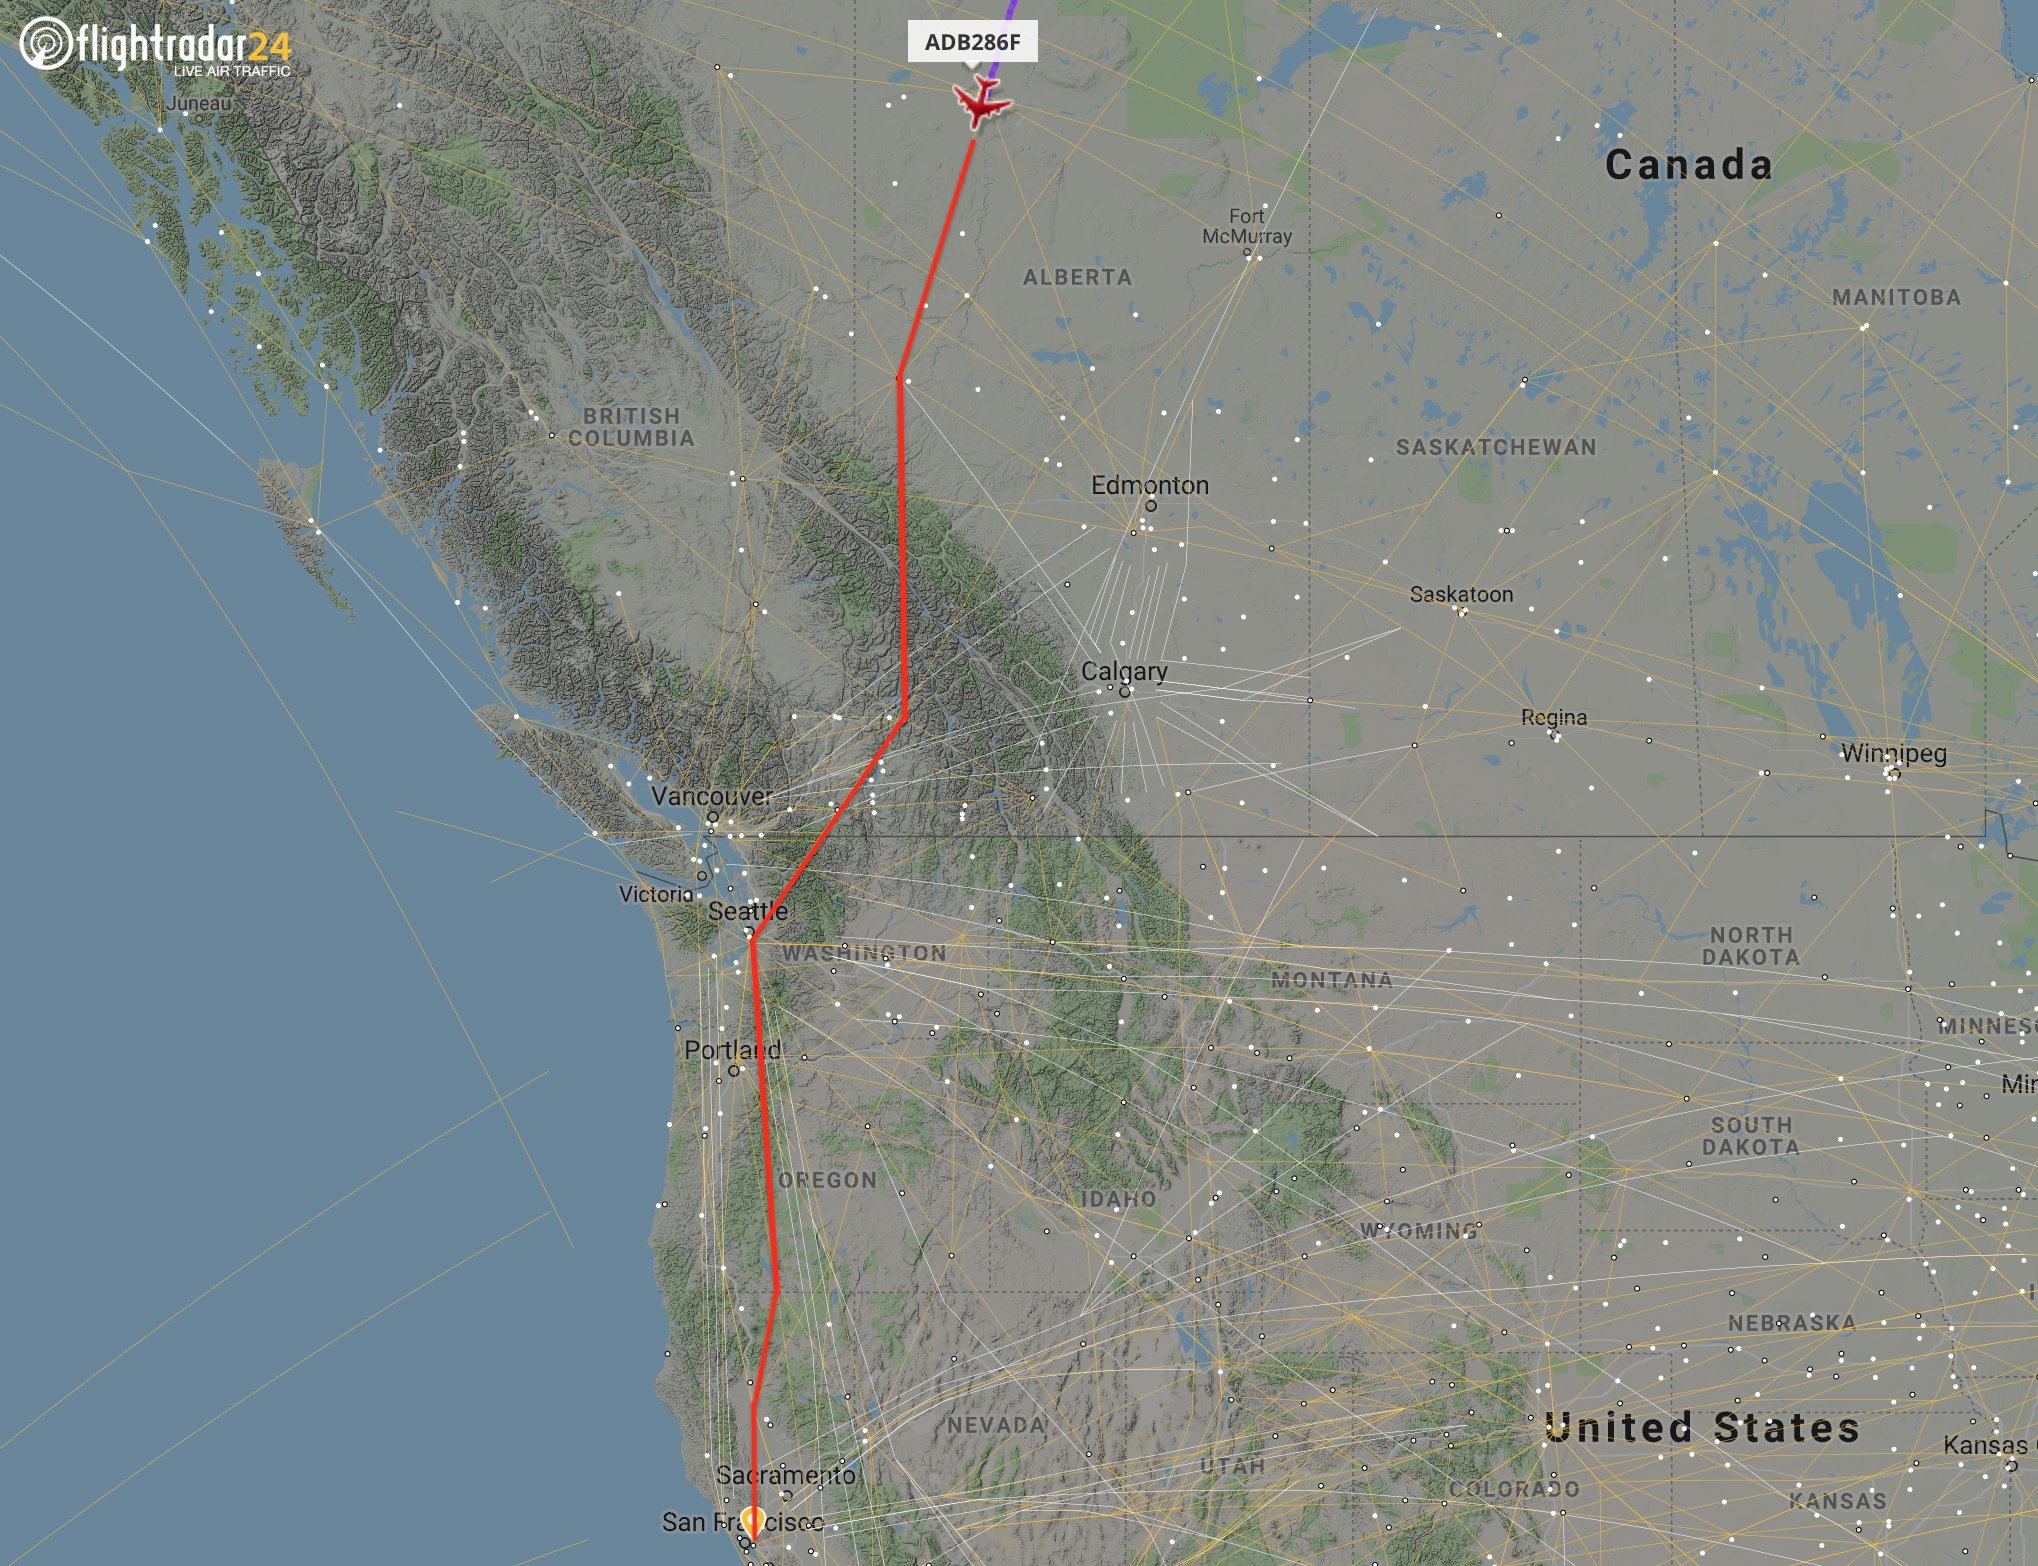 Flightradar24 on Twitter: "@windsurfmaniac We used the red lines to  indicate the flight's filed route." / Twitter